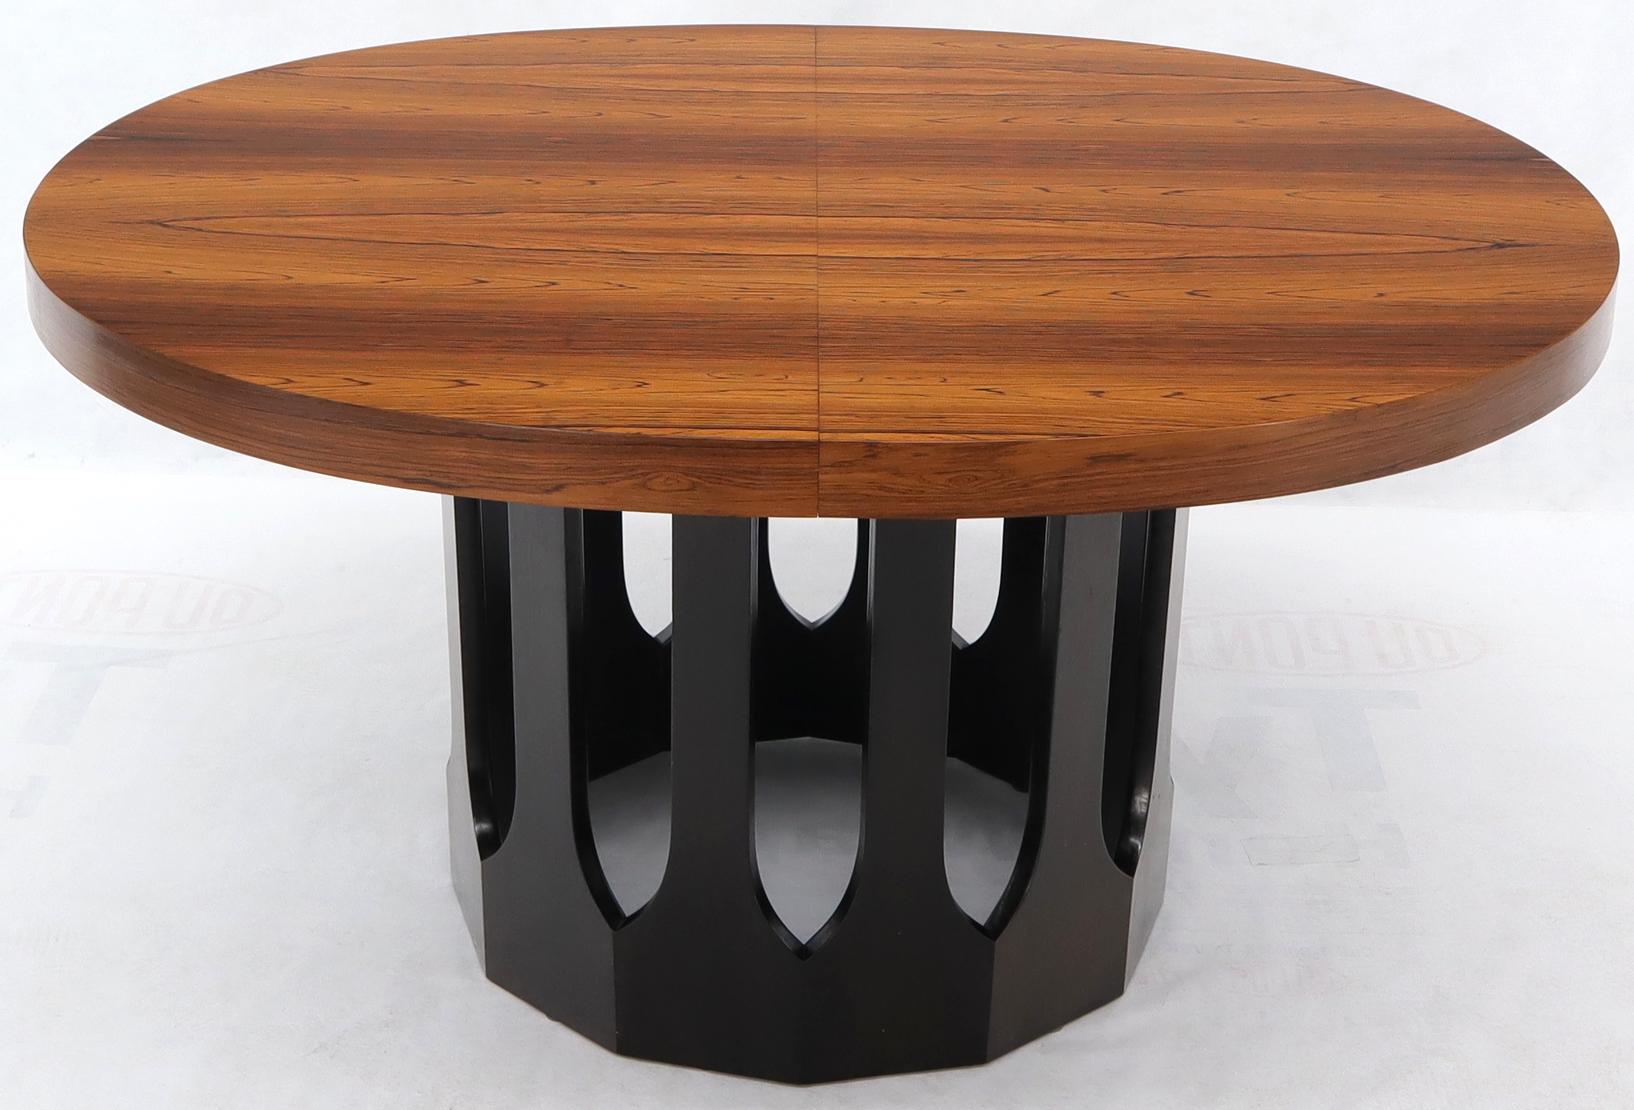 Stunning mint condition oval dining table by Harvey Probber that come with two 16